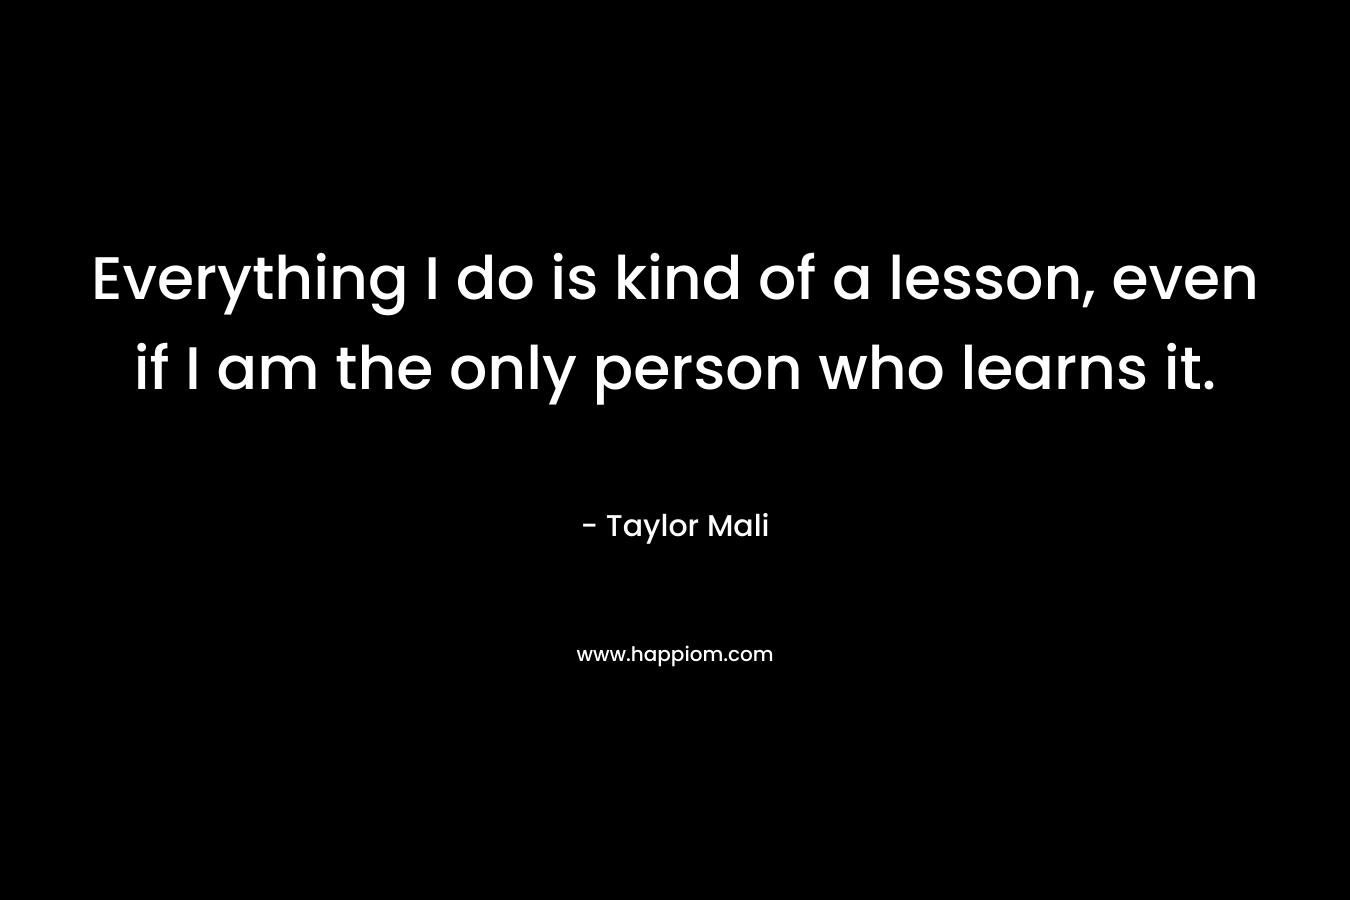 Everything I do is kind of a lesson, even if I am the only person who learns it. – Taylor Mali